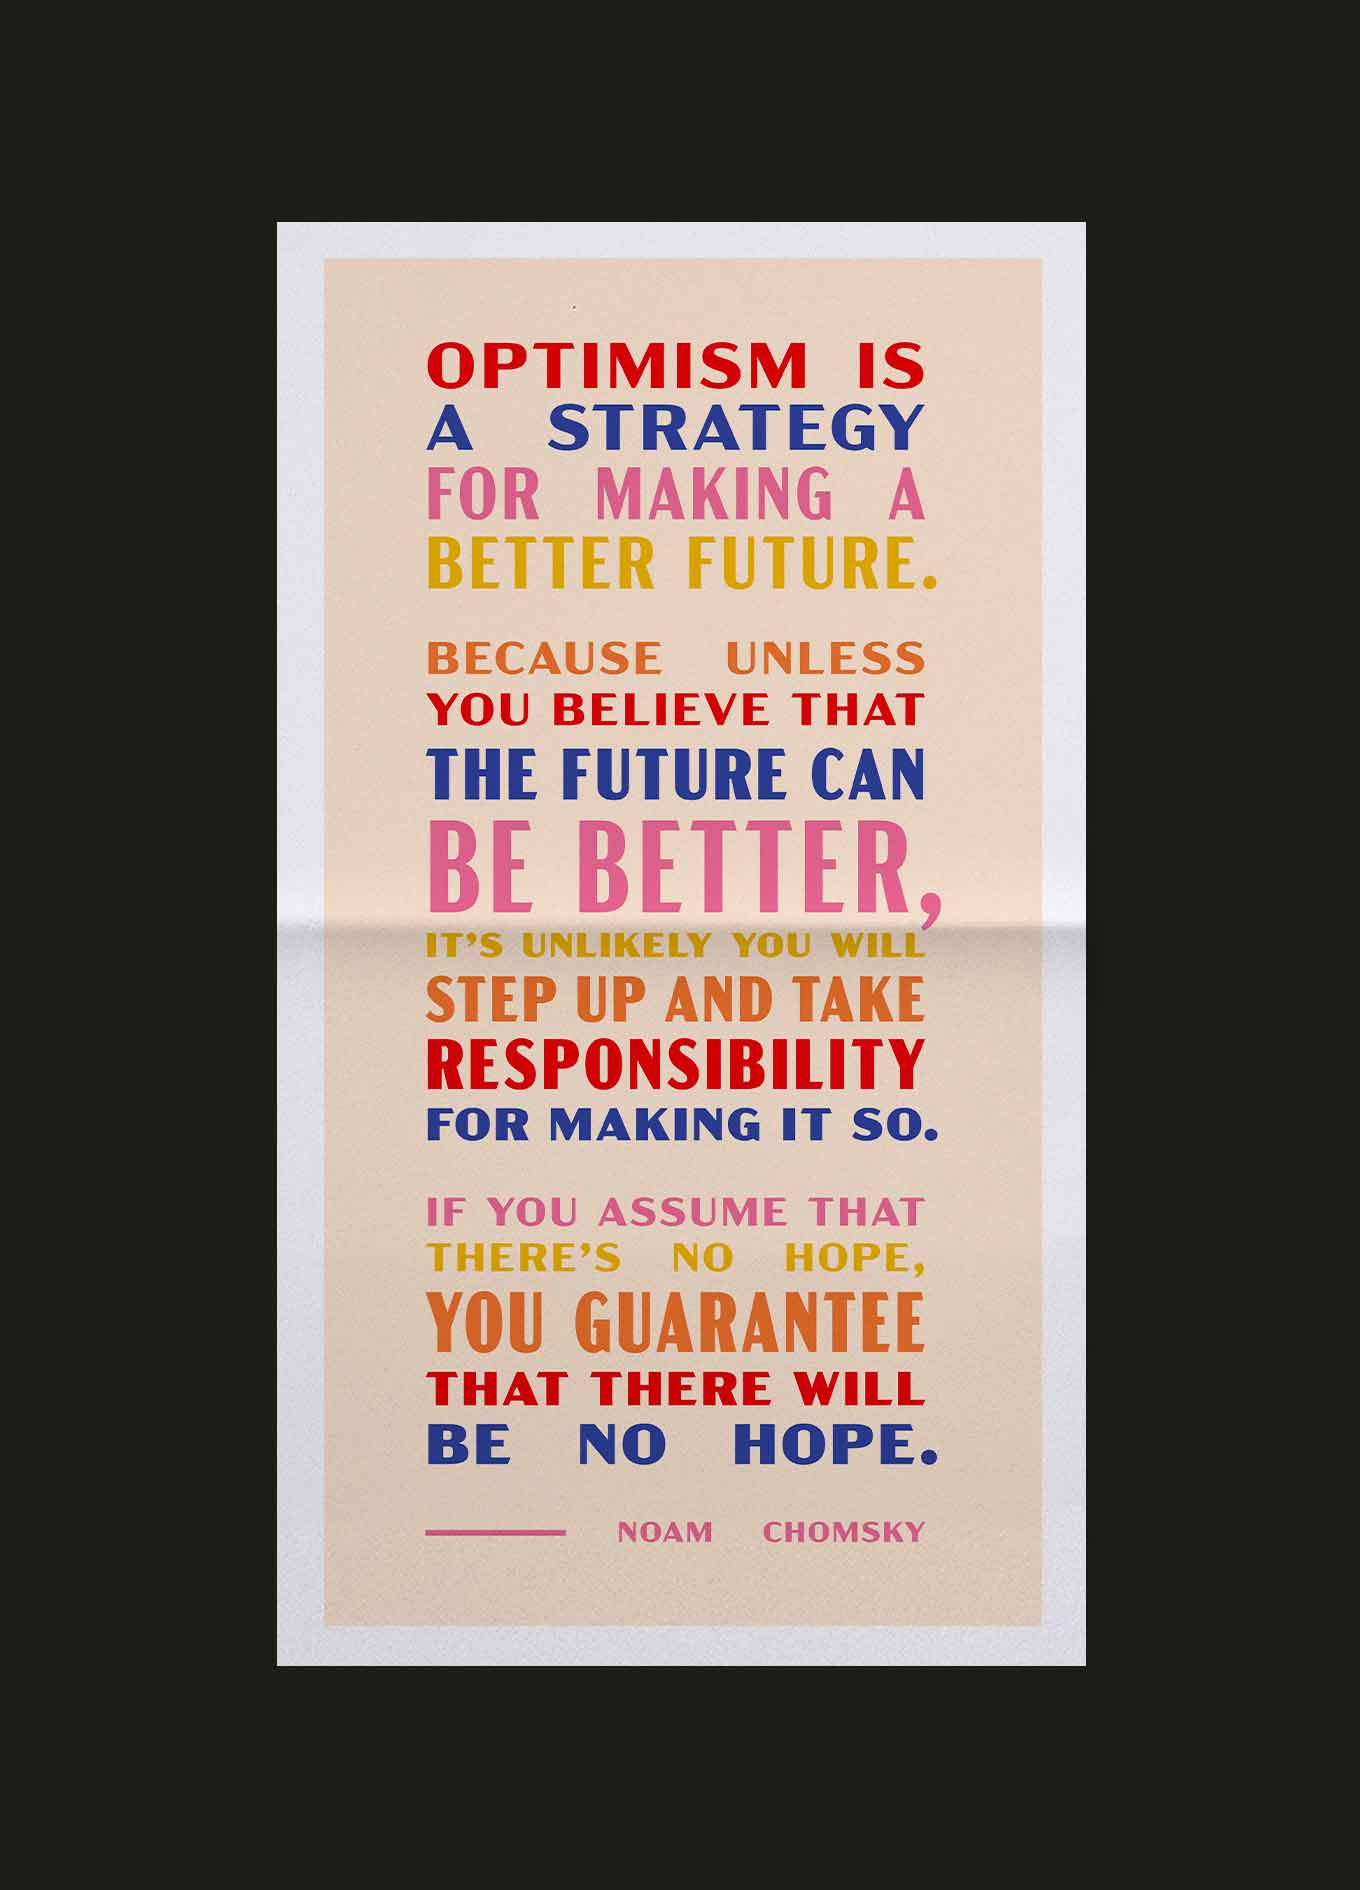 Goodnewspaper quote: Optimism is a strategy for making a better future. Because unless you believe that the future can be better, it's unlikely you will step up and take responsibility for making it so. If you assume that there's no hope, you guarantee that there will be no hope. — Noam Chomsky